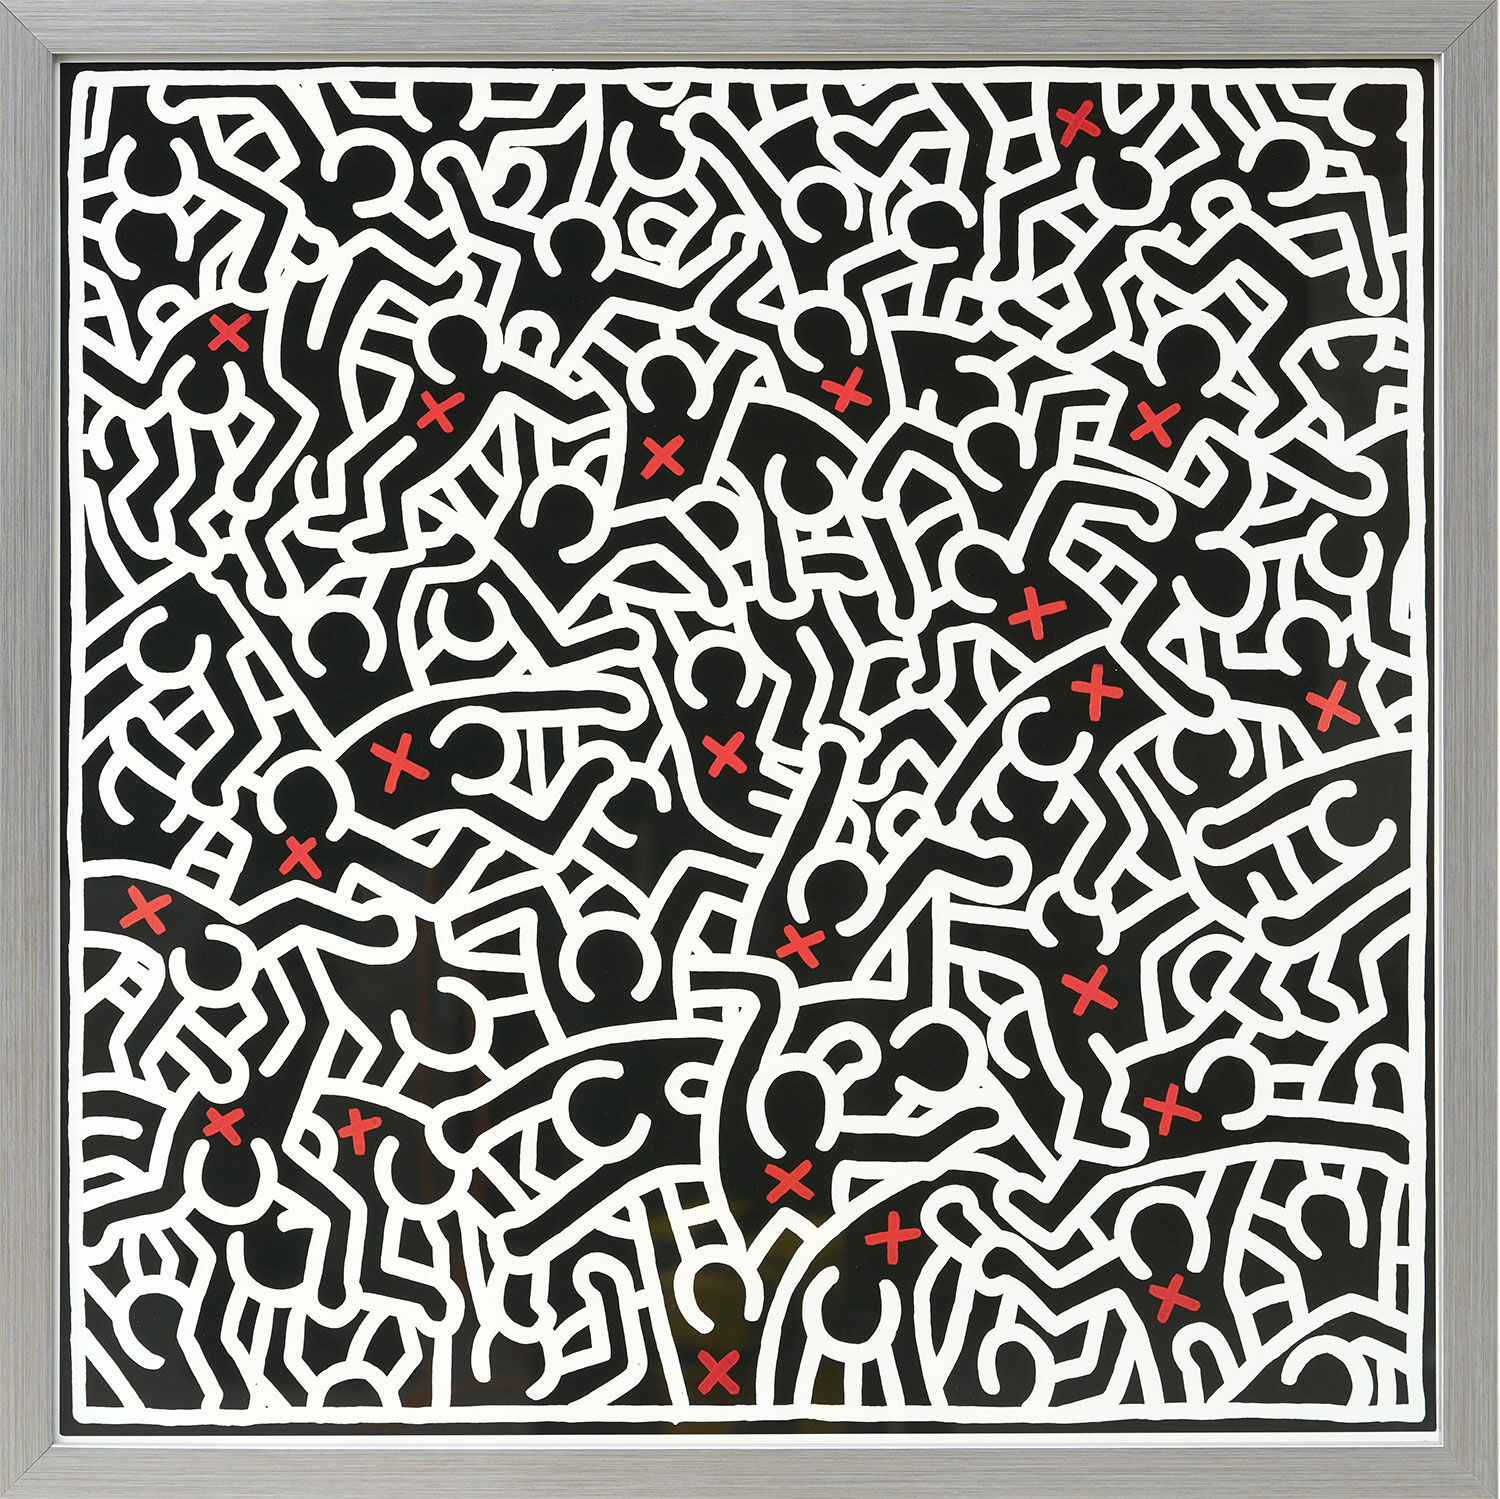 Picture "Untitled, April" (1985), framed by Keith Haring